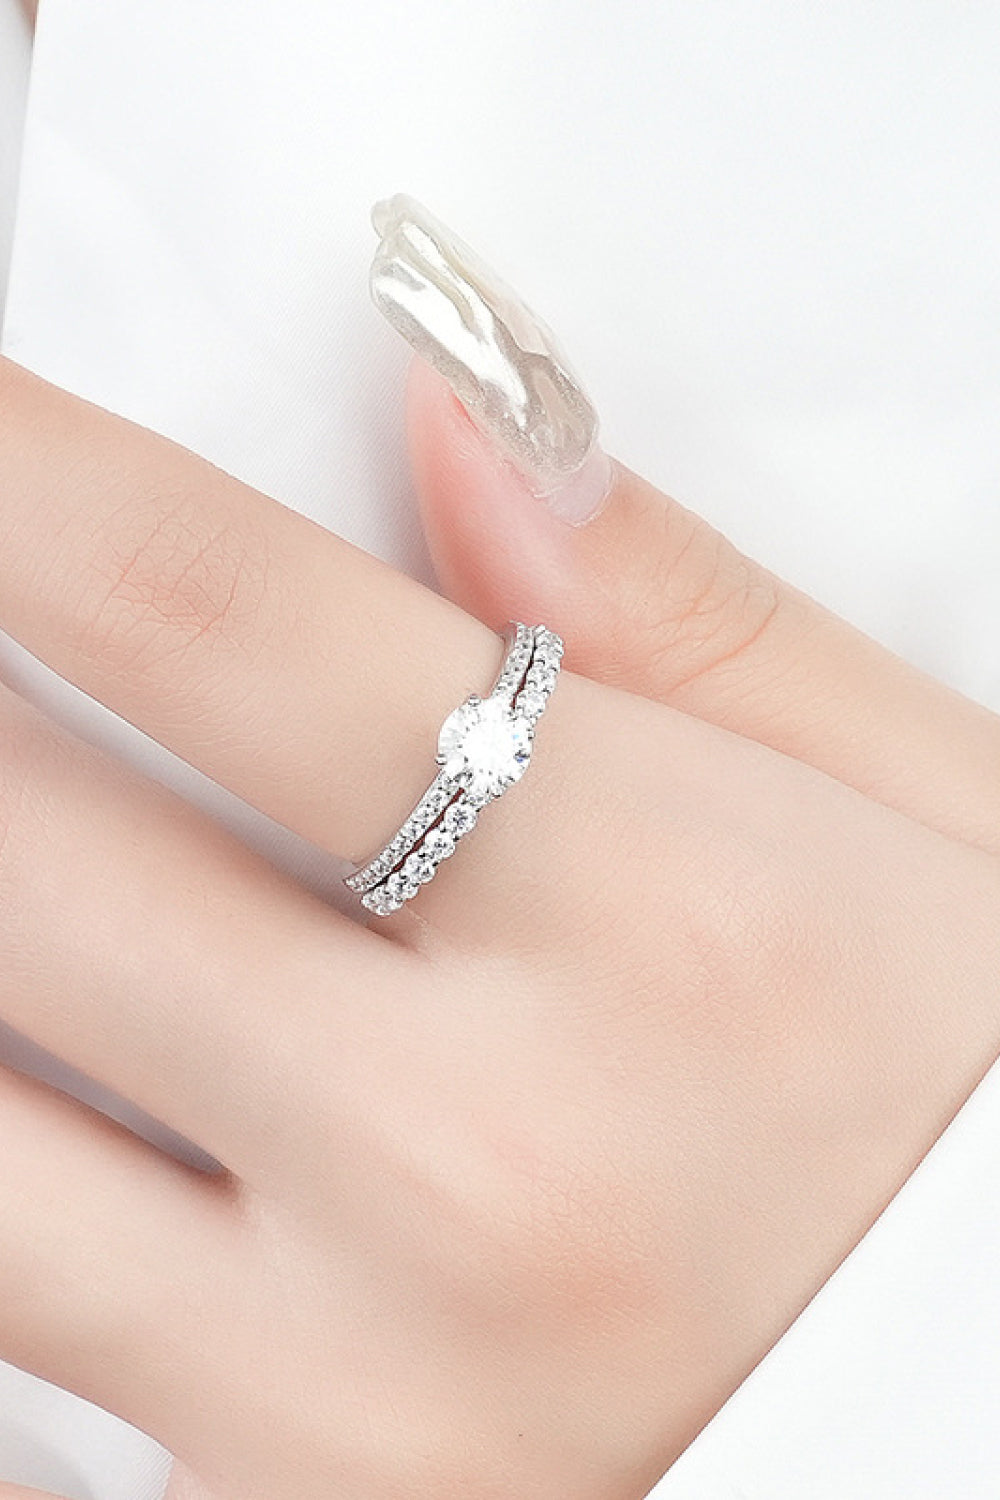 2-Piece 925 Sterling Silver Moissanite Ring